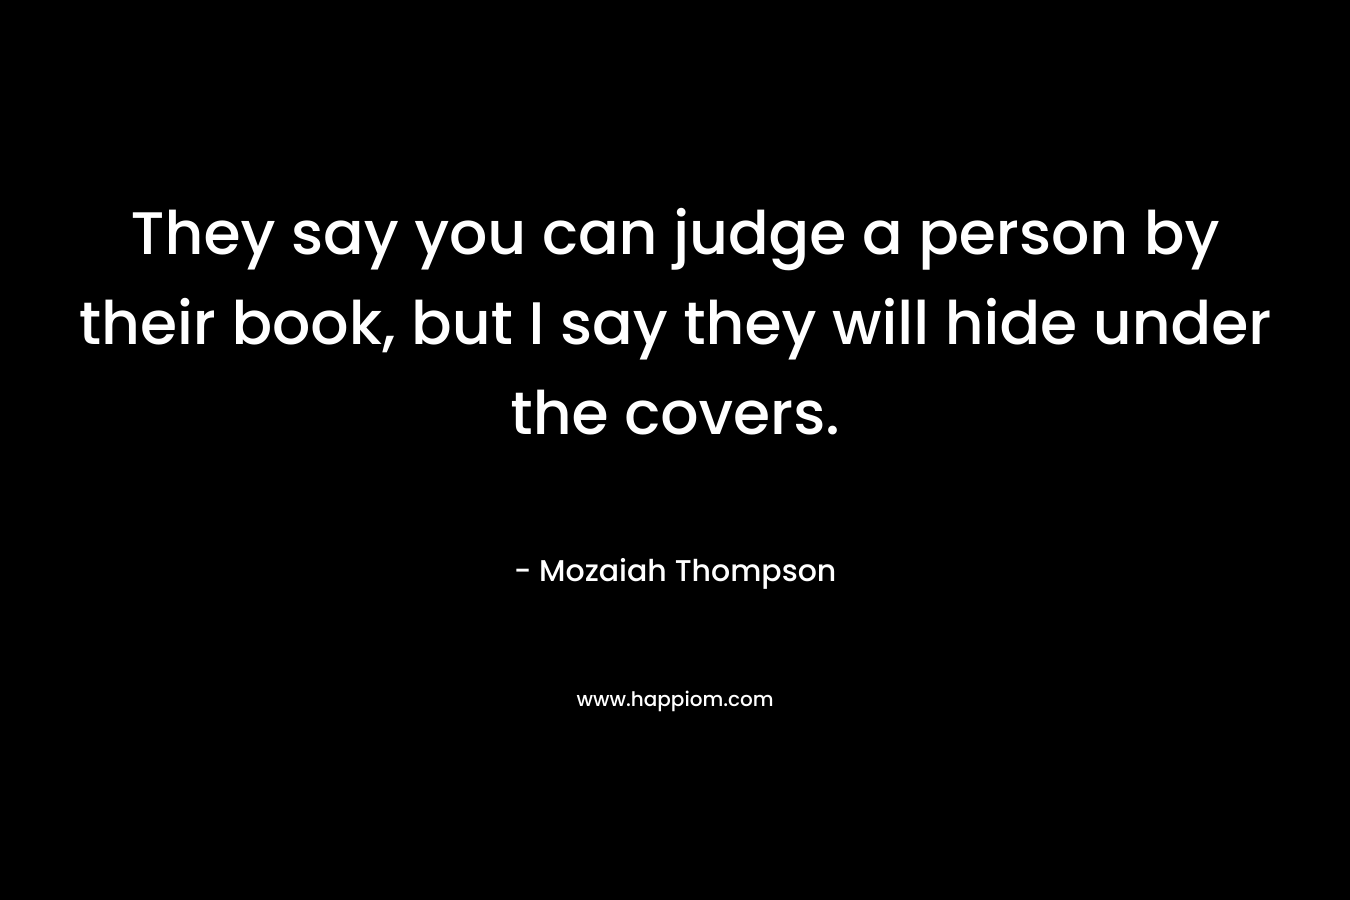 They say you can judge a person by their book, but I say they will hide under the covers. – Mozaiah Thompson